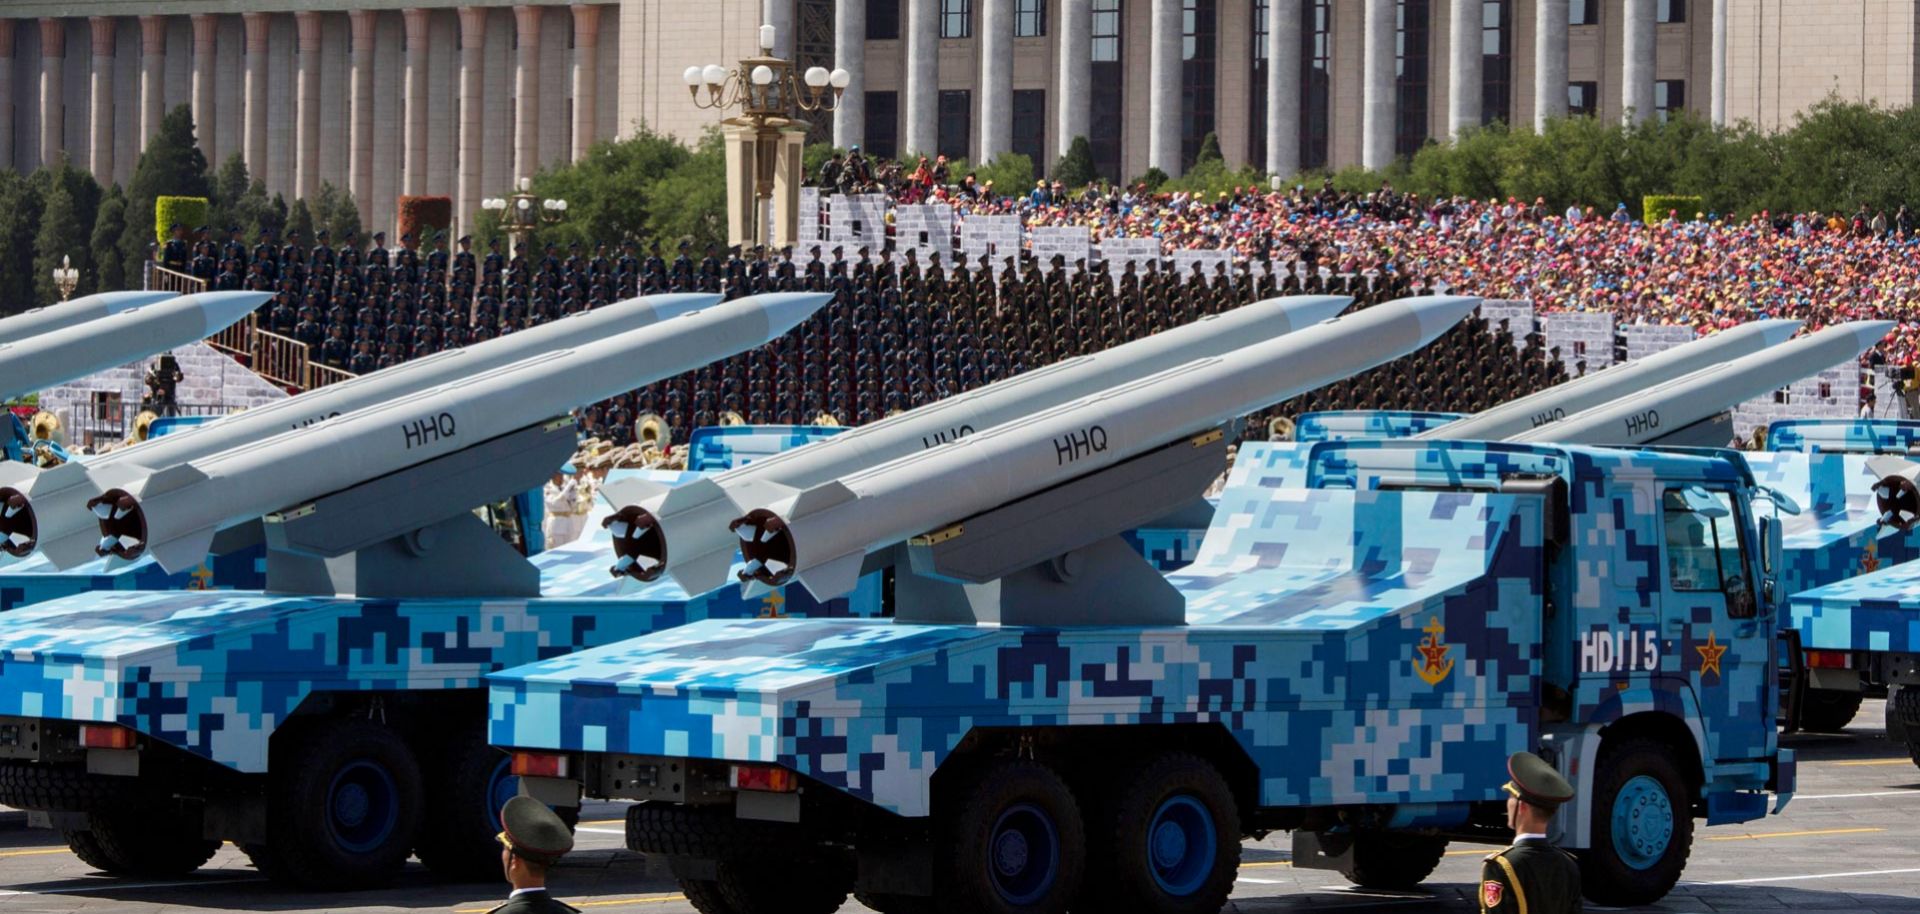 Chinese missiles loaded onto trucks in Tiananmen Square during a military parade Sept. 3 in Beijing.